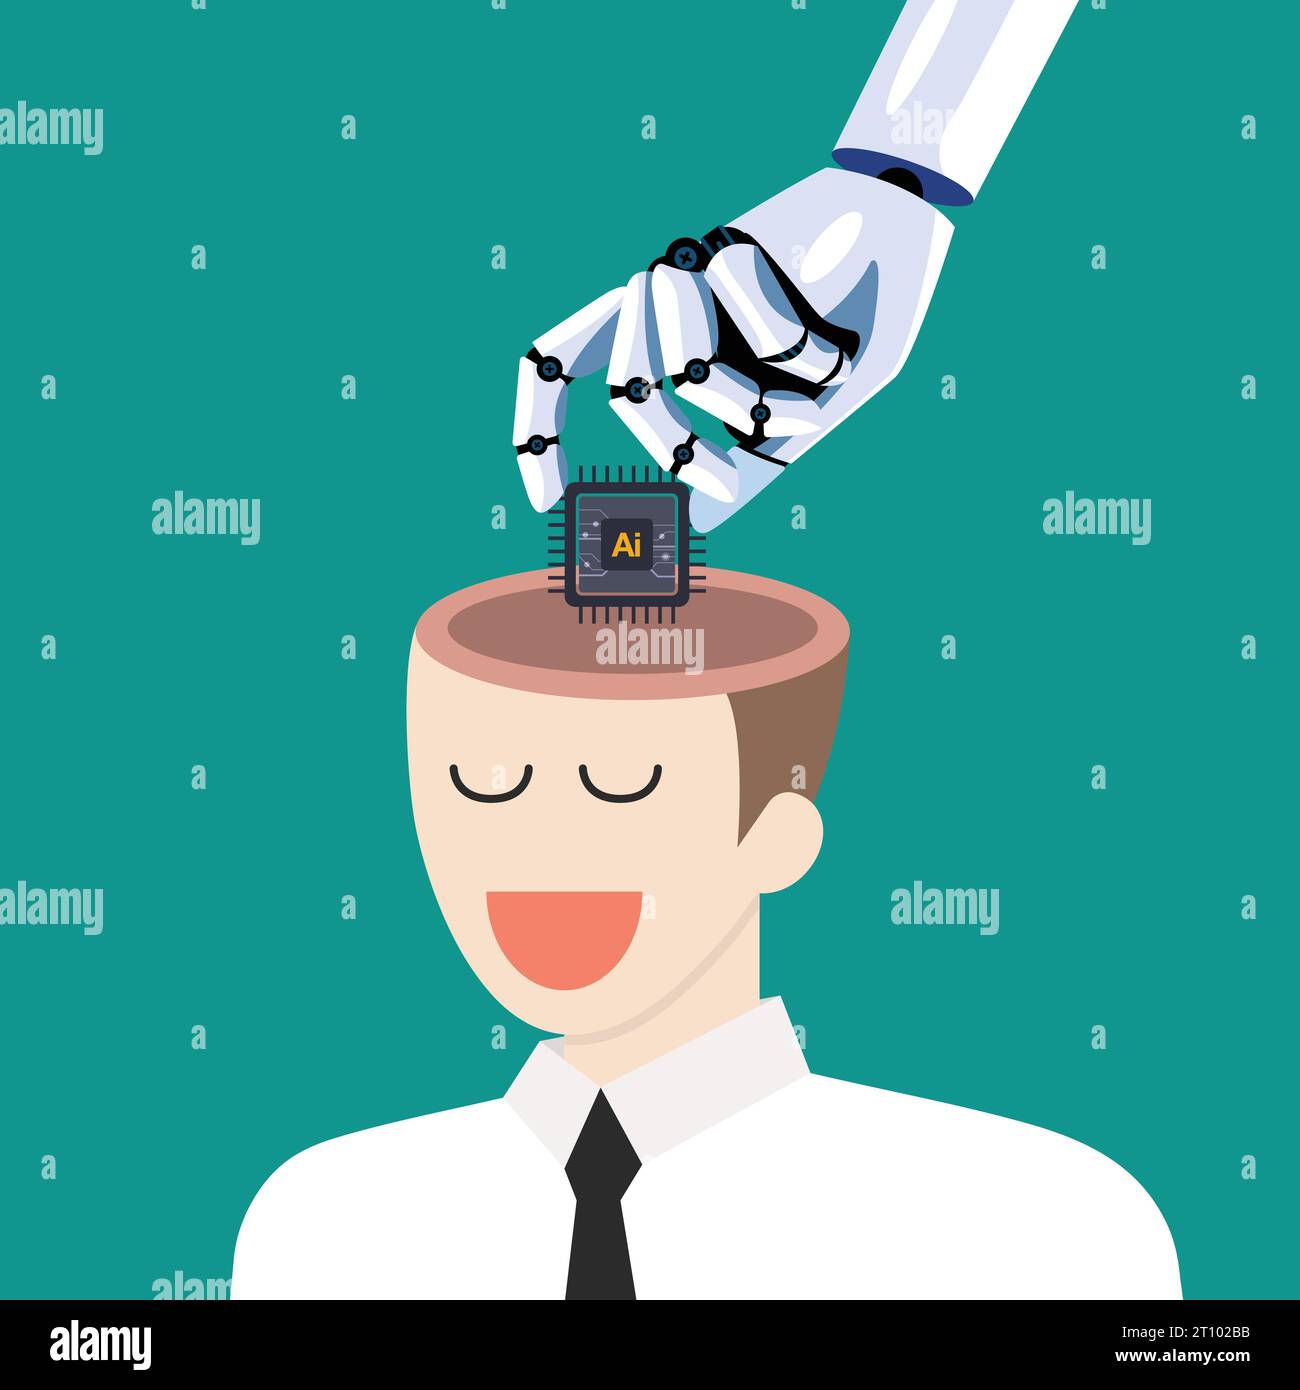 Robot hand put AI processing chip into human brain. machine learning and cyber mind domination concept. vector illustration. Stock Vector